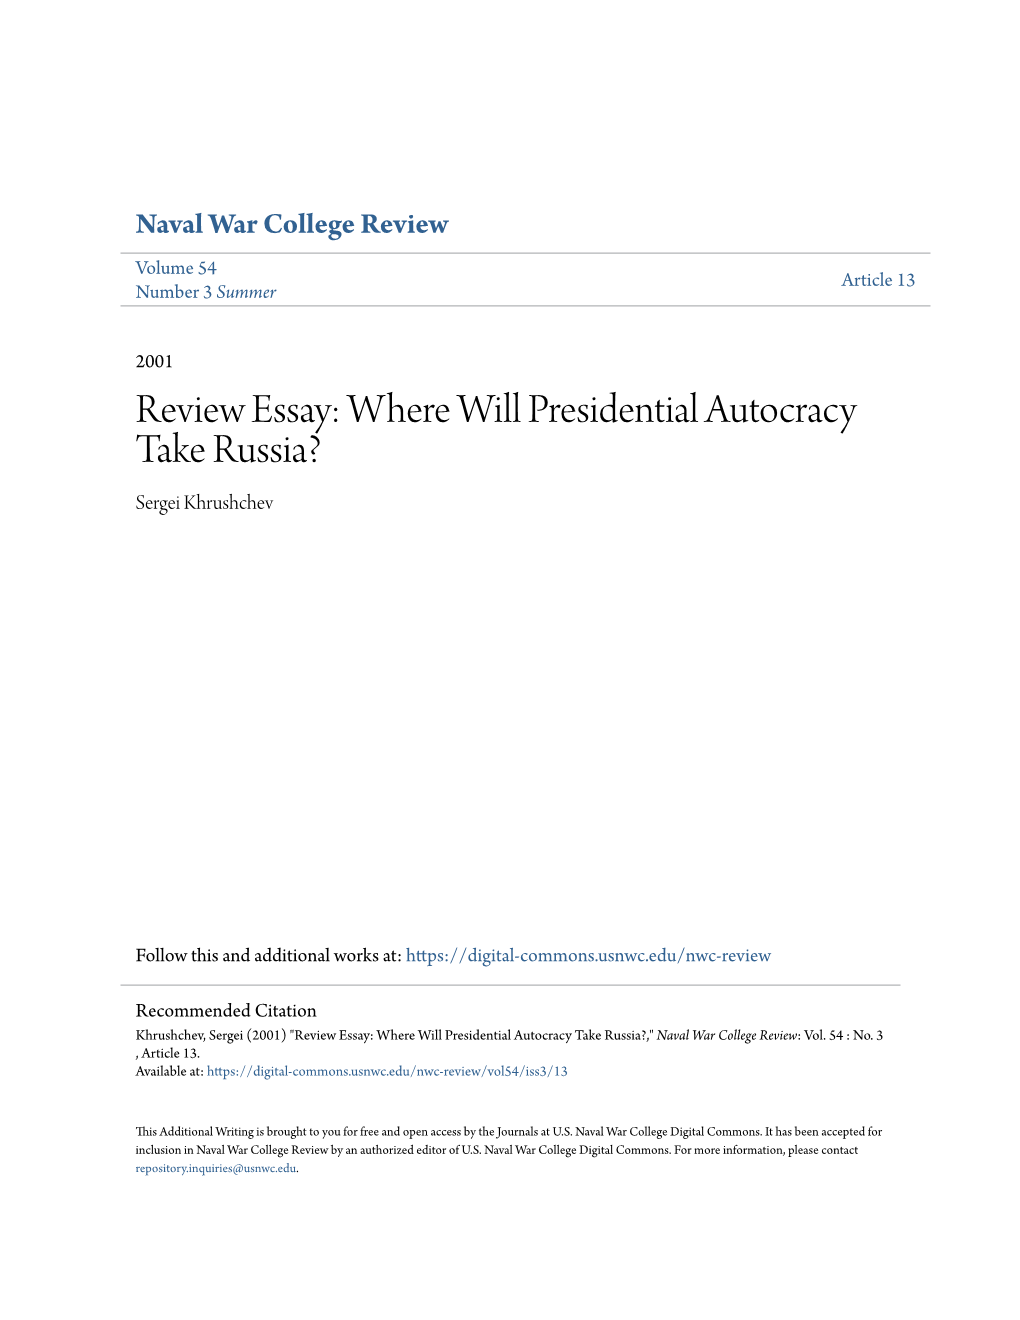 Review Essay: Where Will Presidential Autocracy Take Russia? Sergei Khrushchev